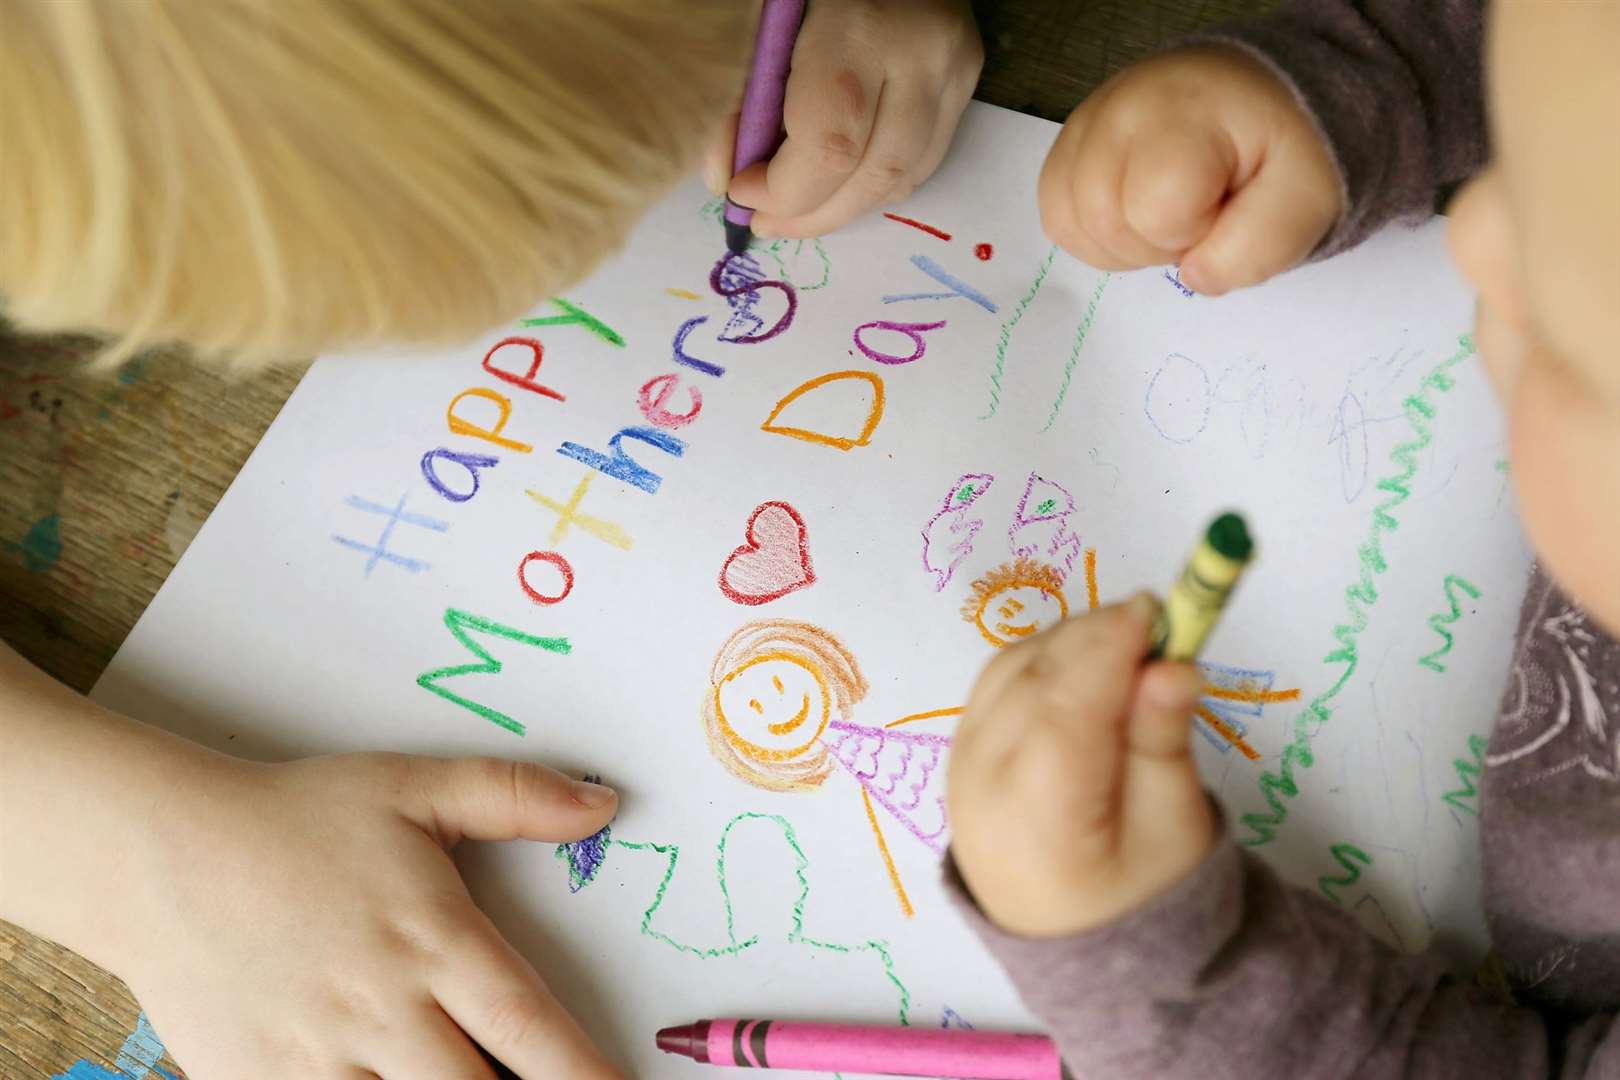 Our My Mum supplements, packed full of children's drawings of their mums, will be appearing in KM Group newspapers from Wednesday, March 6. Photo: iStock